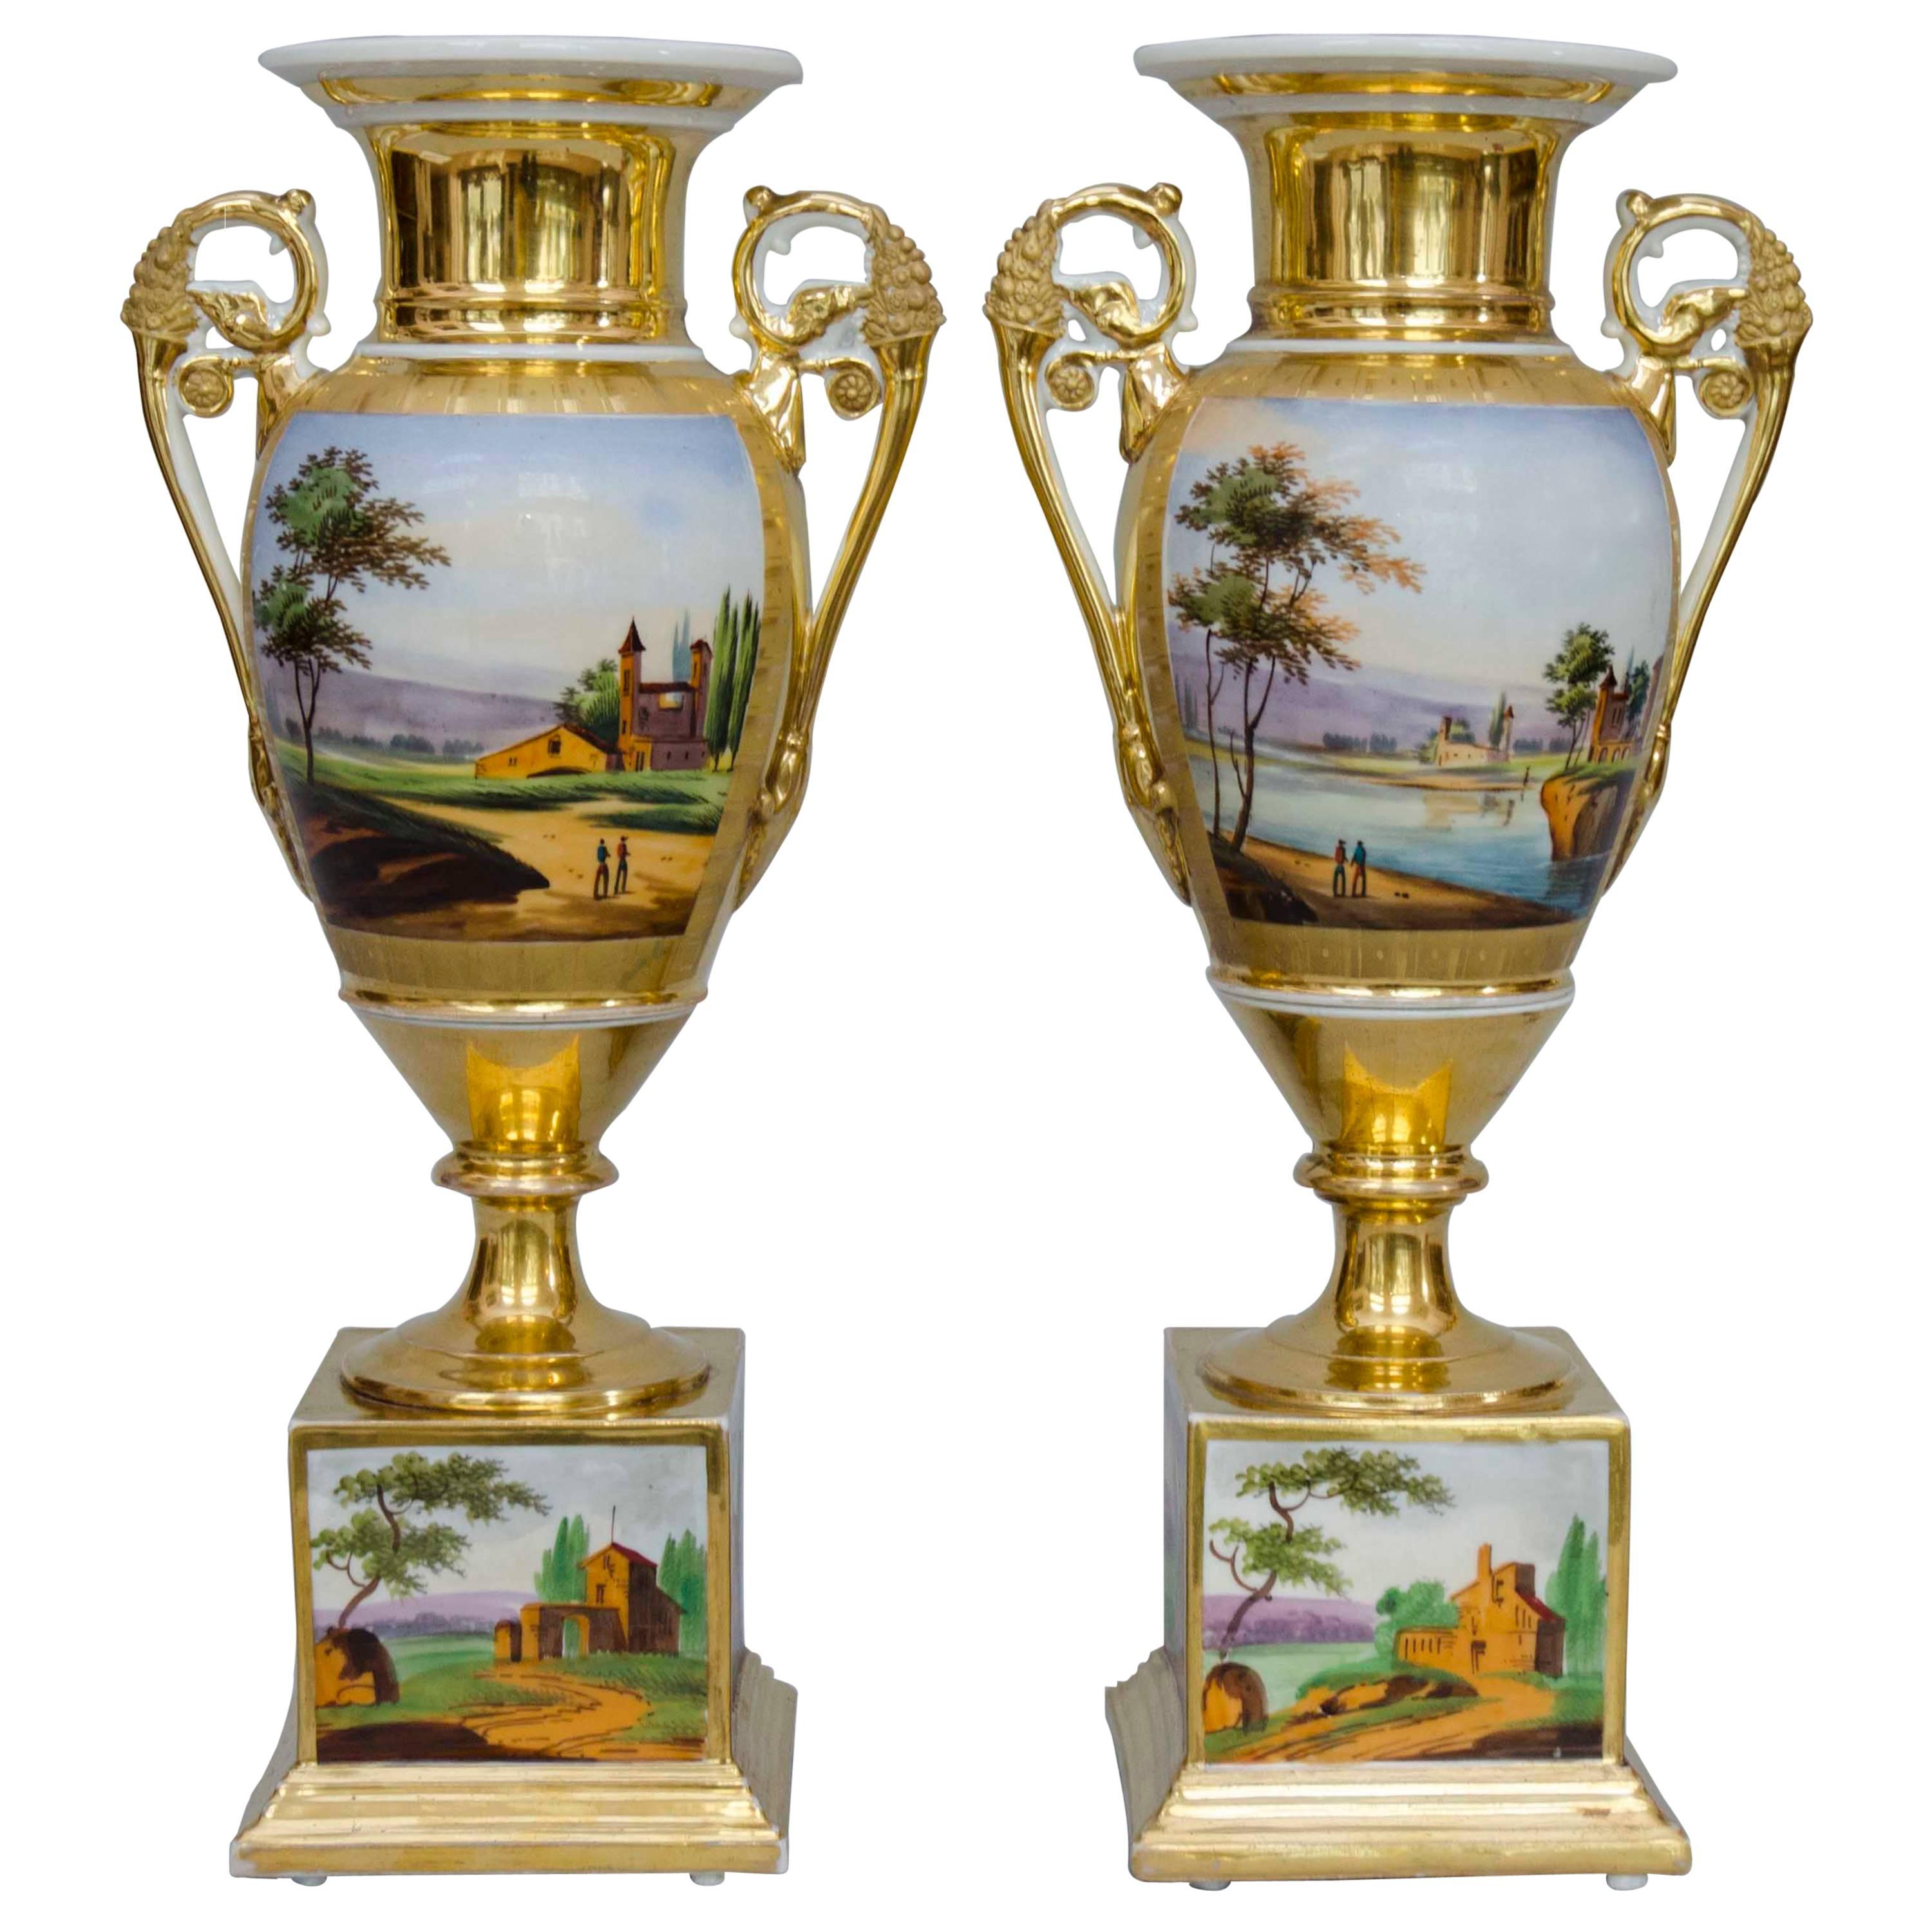 19th Century Squared Based Egg Shaped Vases with Italian Landscapes, Brussels For Sale